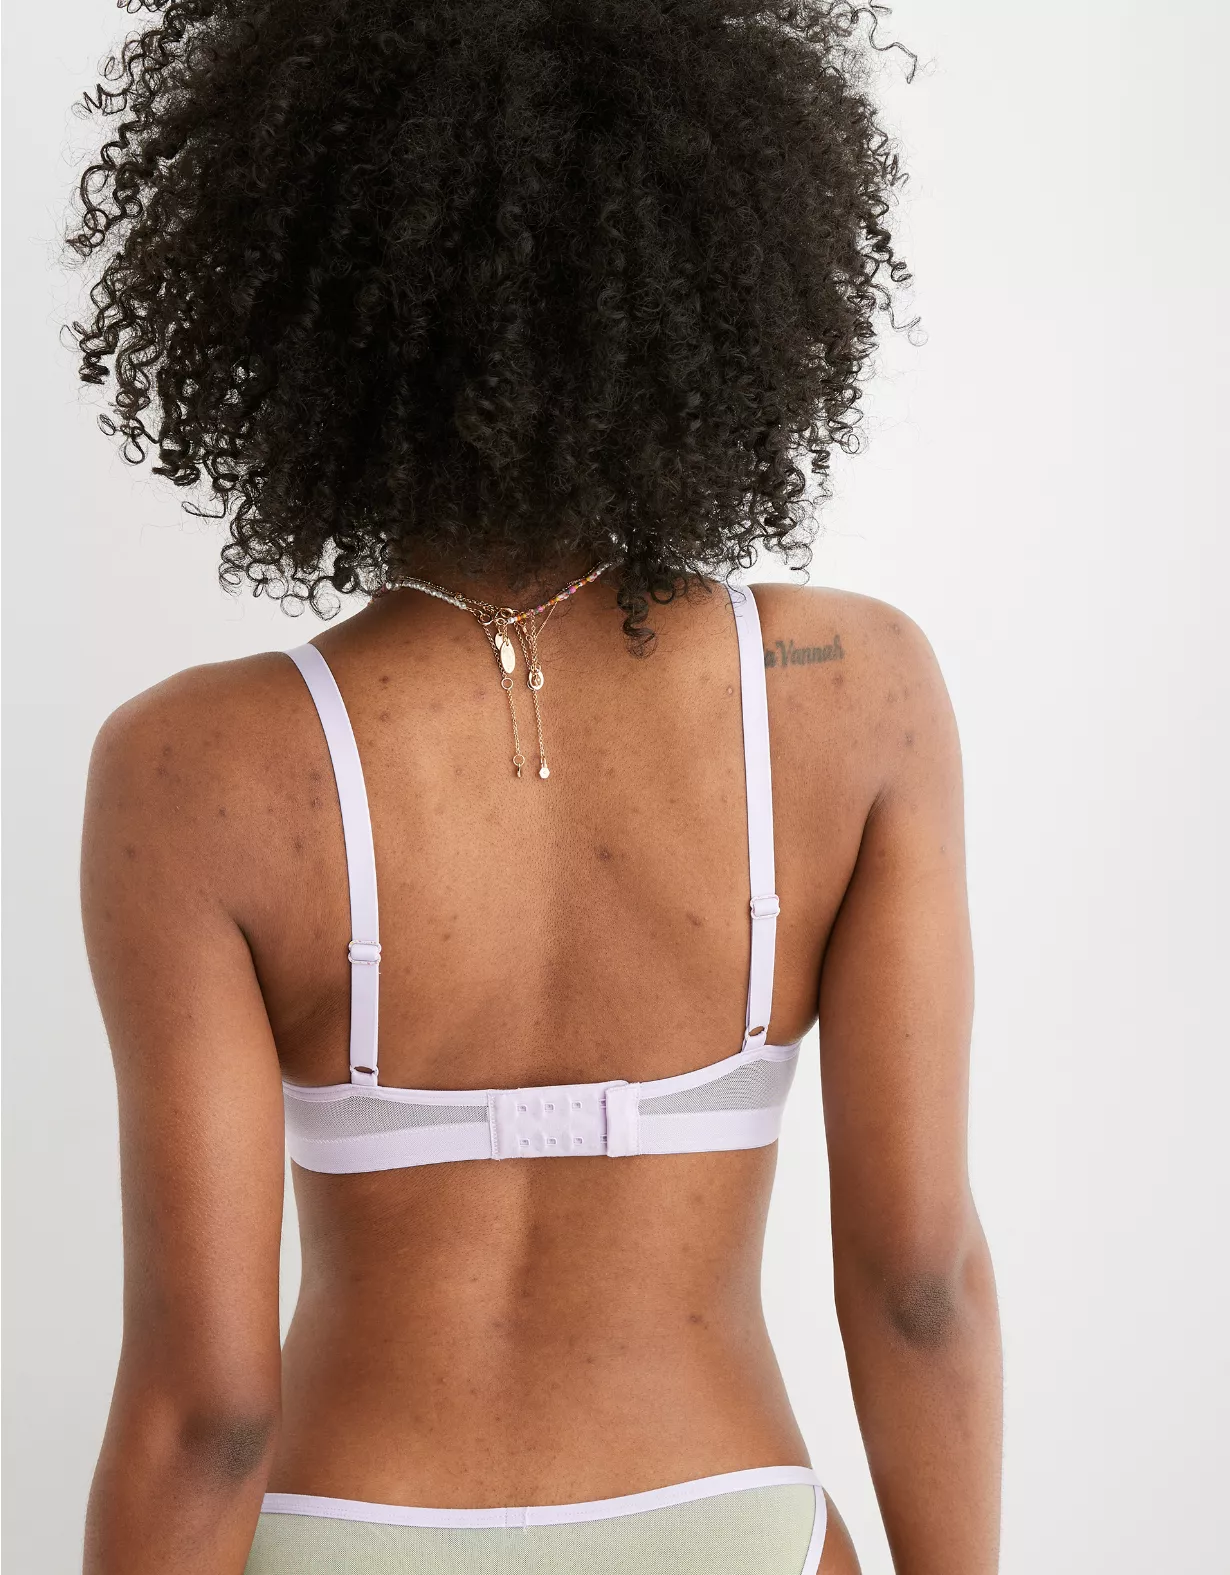 SMOOTHEZ Mesh Triangle Bralette